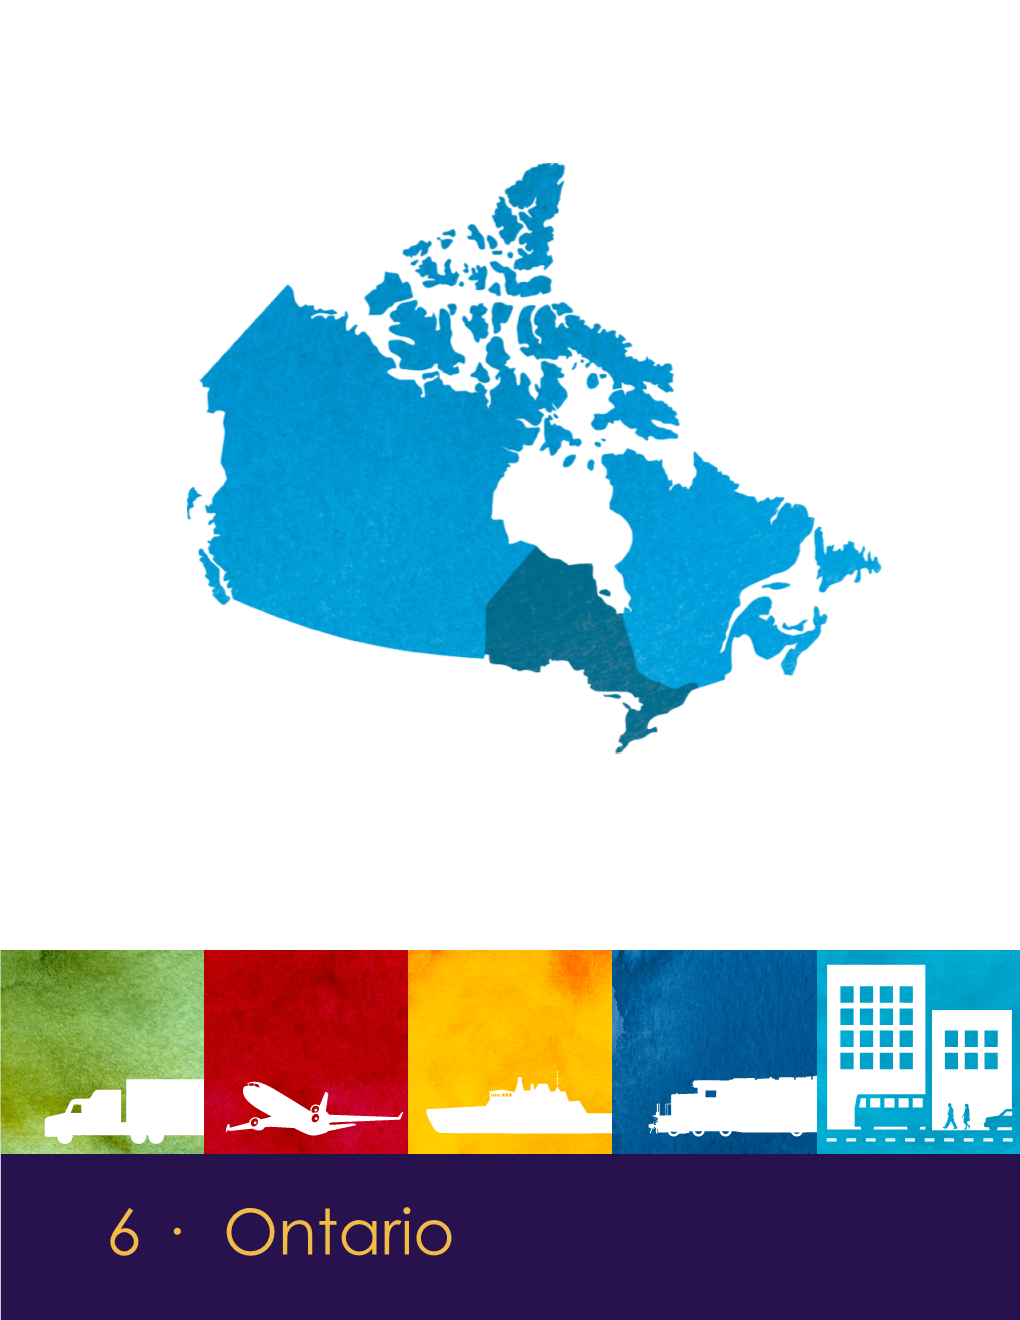 Climate Risks and Adaptation Practices for the Canadian Transportation Sector 2016 (Pp